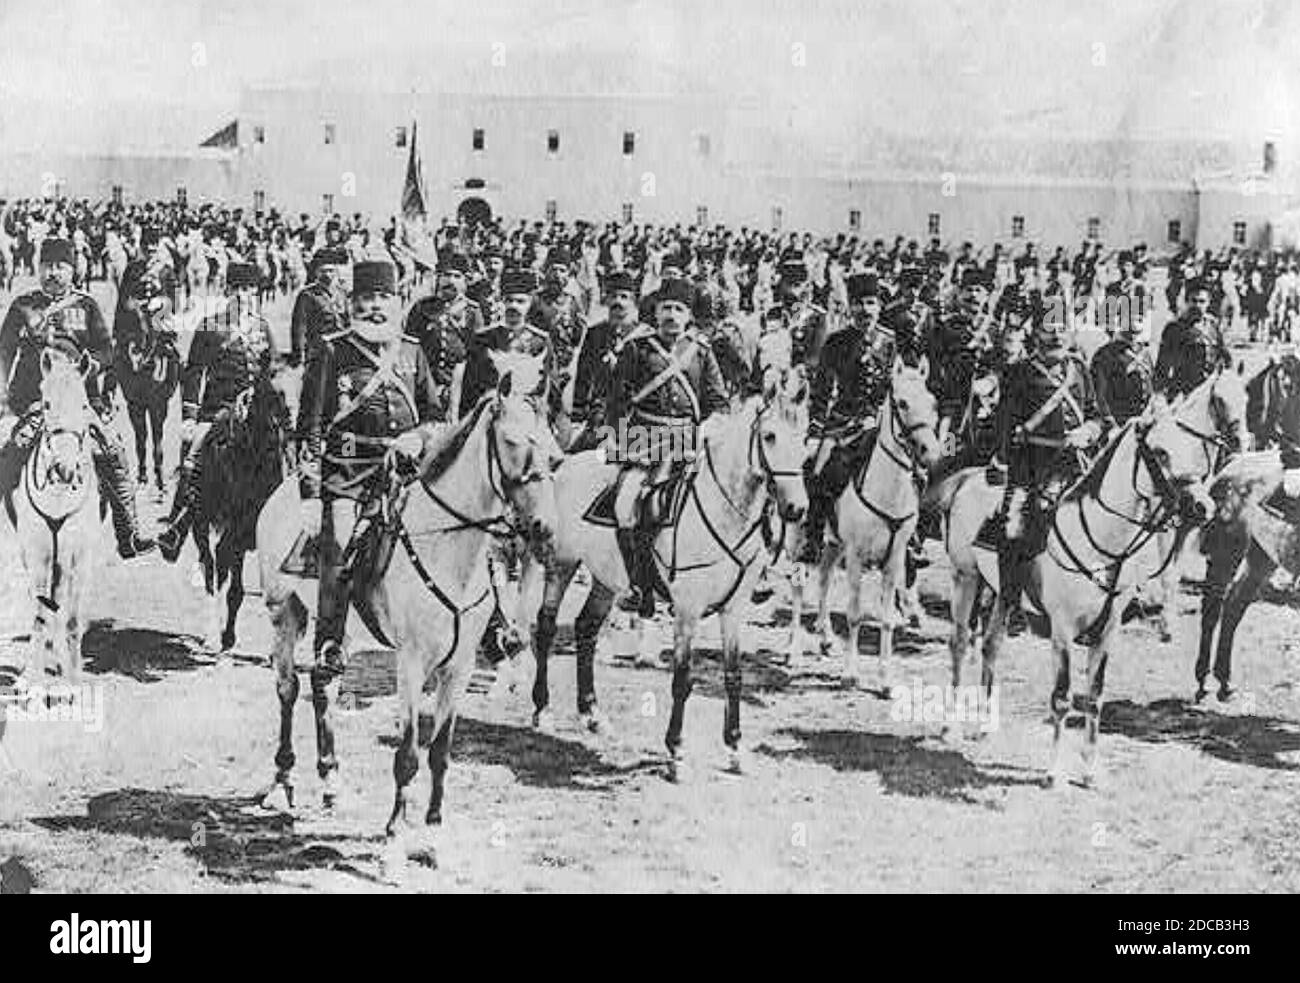 TURKISH ARMY CAVALRY UNIT about 1912 Stock Photo